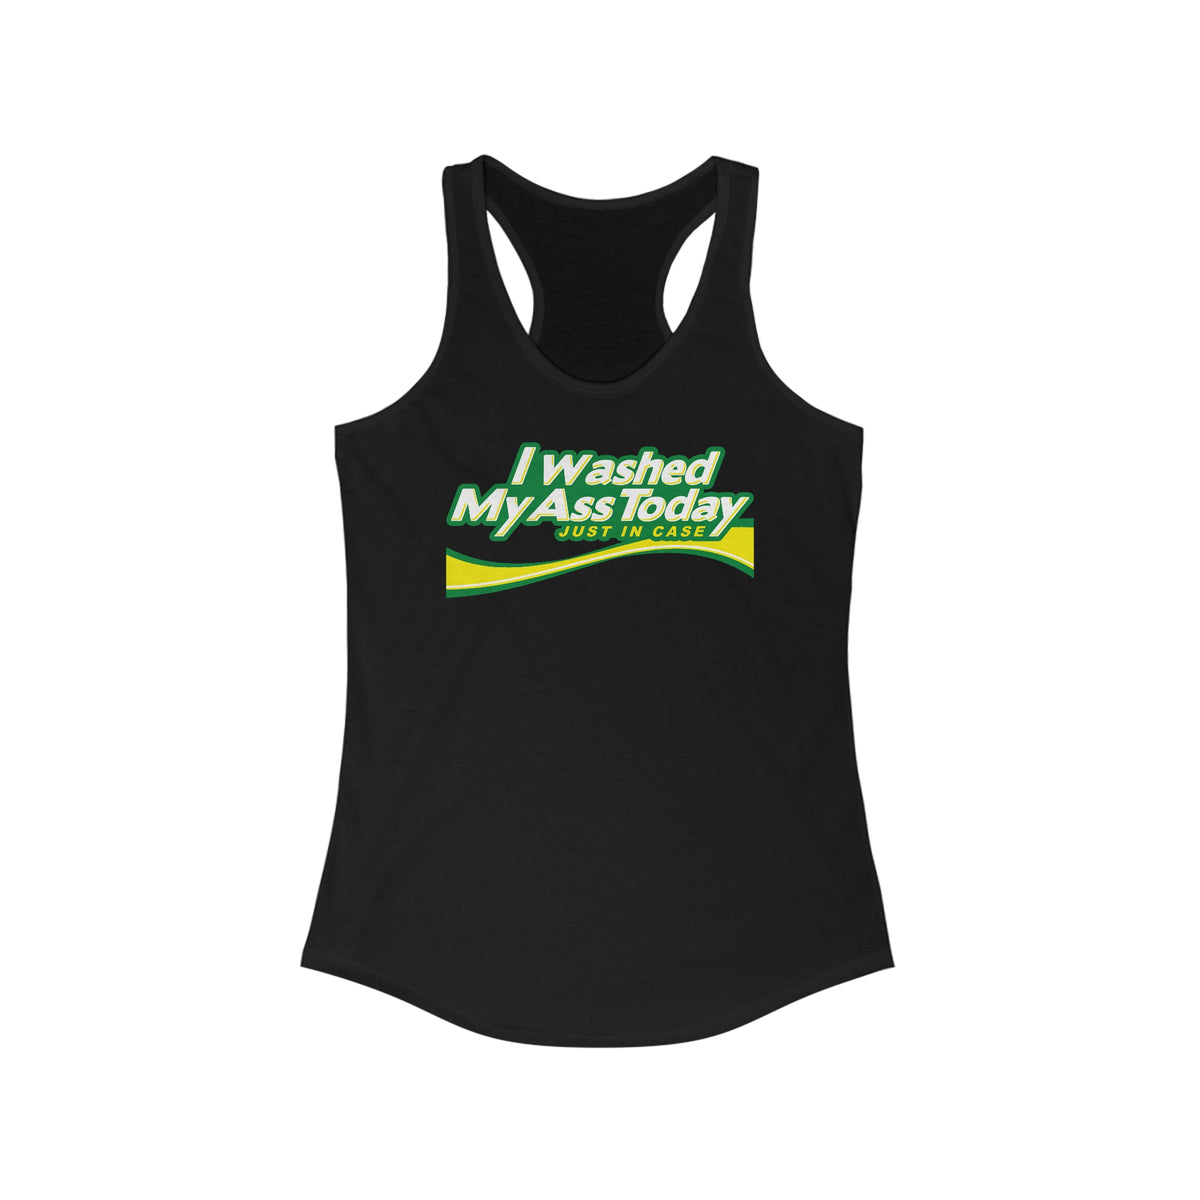 I Washed My Ass Today - Just In Case - Women’s Racerback Tank